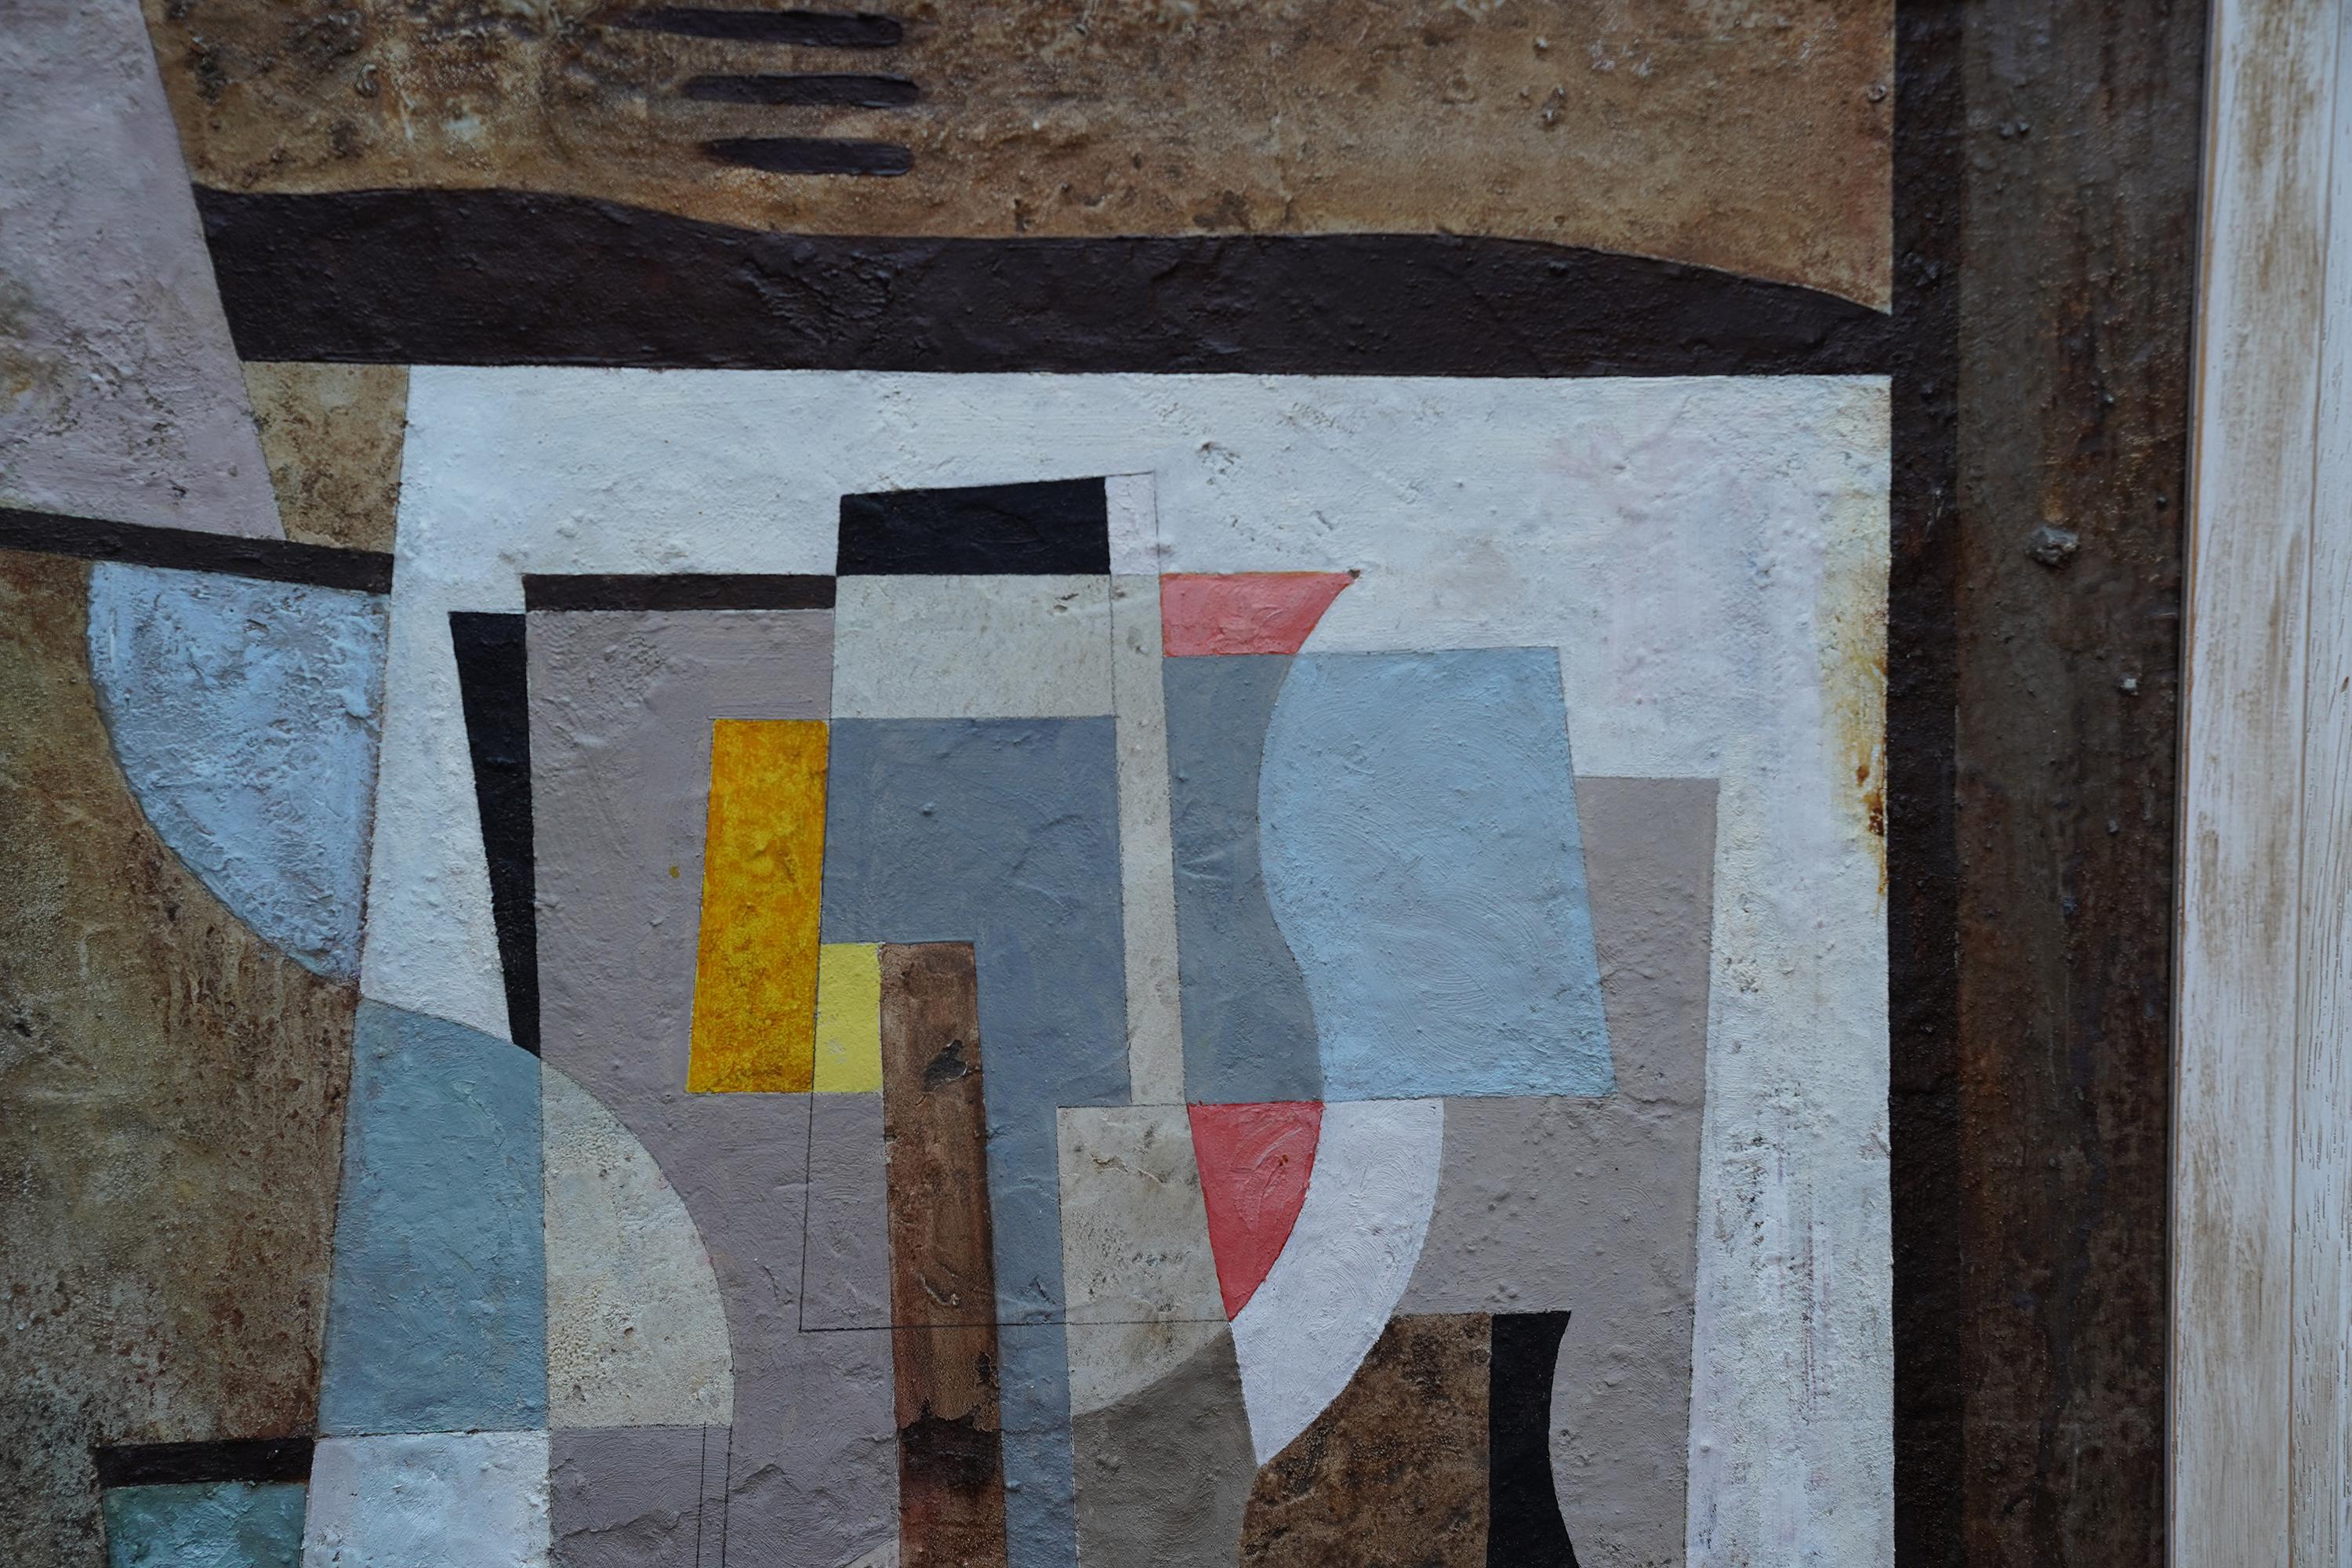 This superb Scottish abstract oil on board painting is by noted artist Colin McGurk. Painted in 1957 it is  a work of geometric shapes with a palette of pink, orange and egg shell blue centrally, with very textured browns bordering the work. The